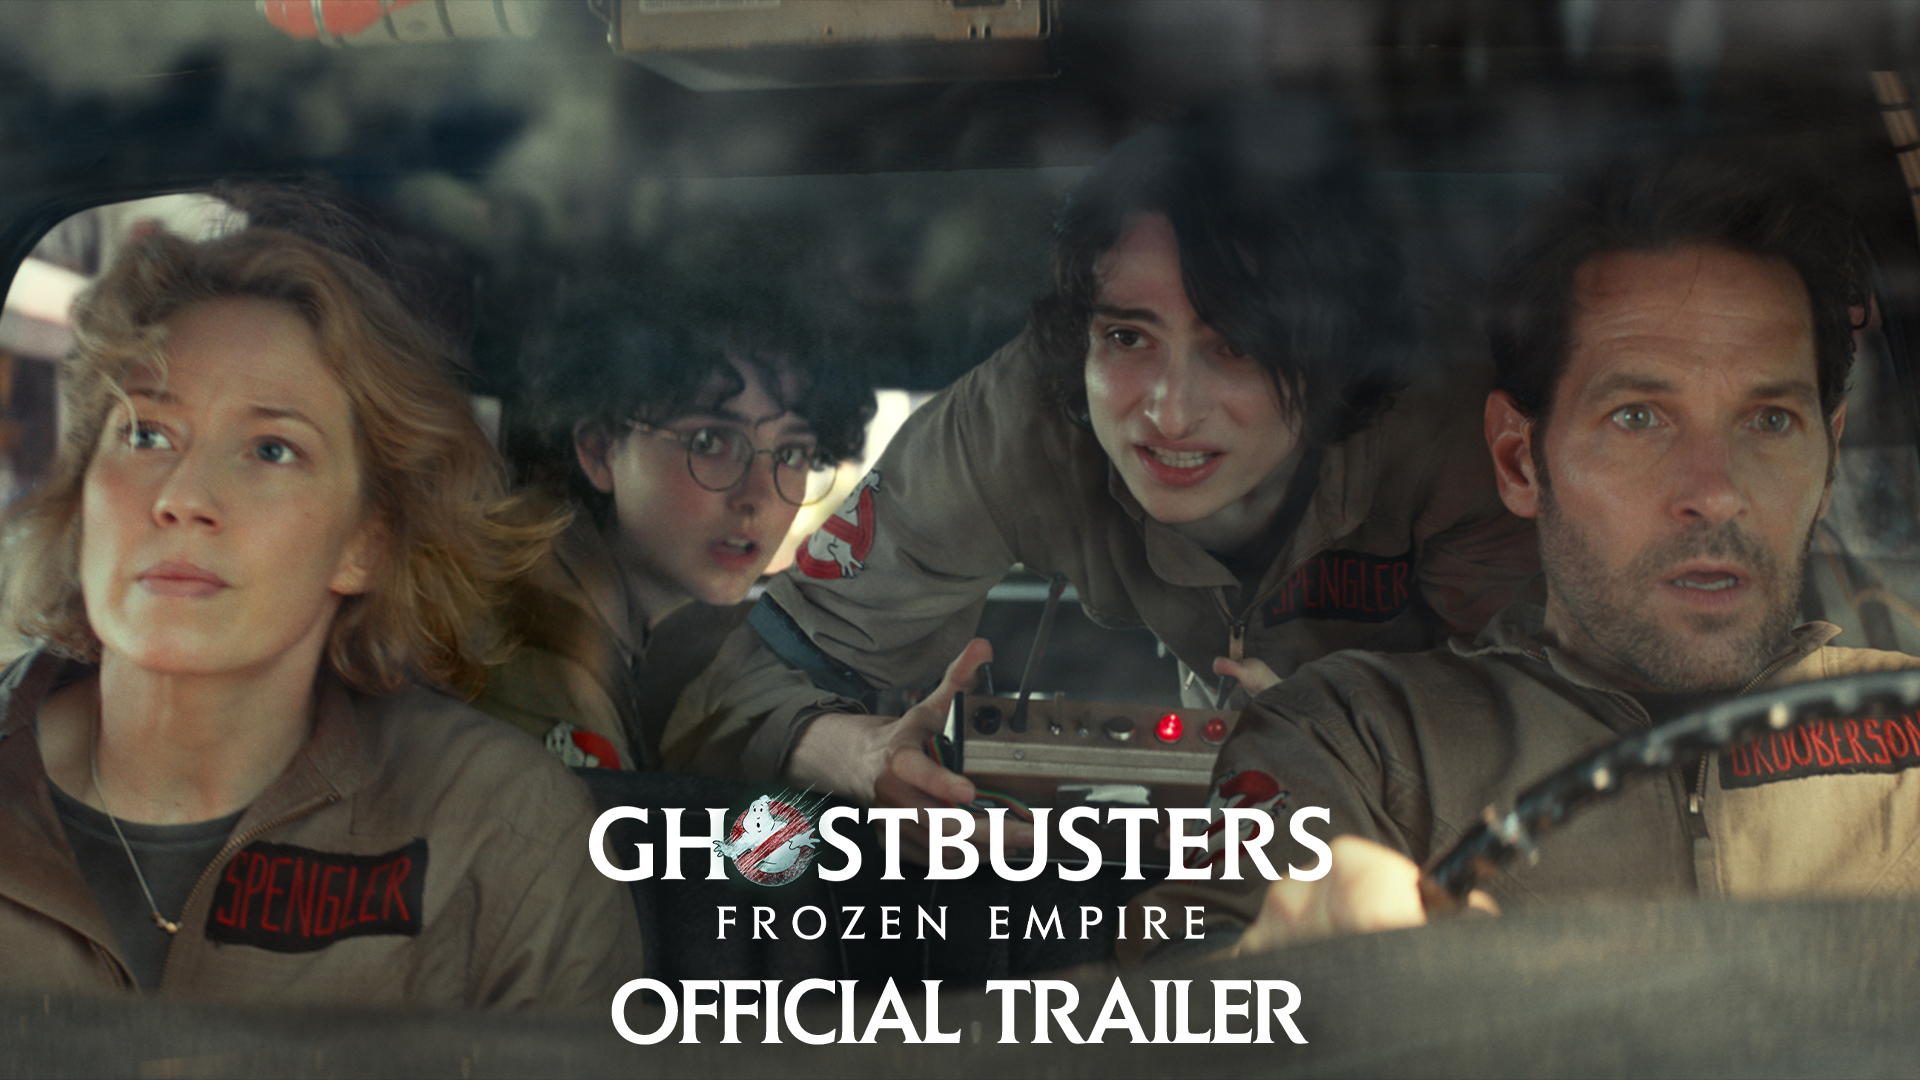 Ghostbusters Frozen Empire Showtimes, Movie Tickets & Trailers